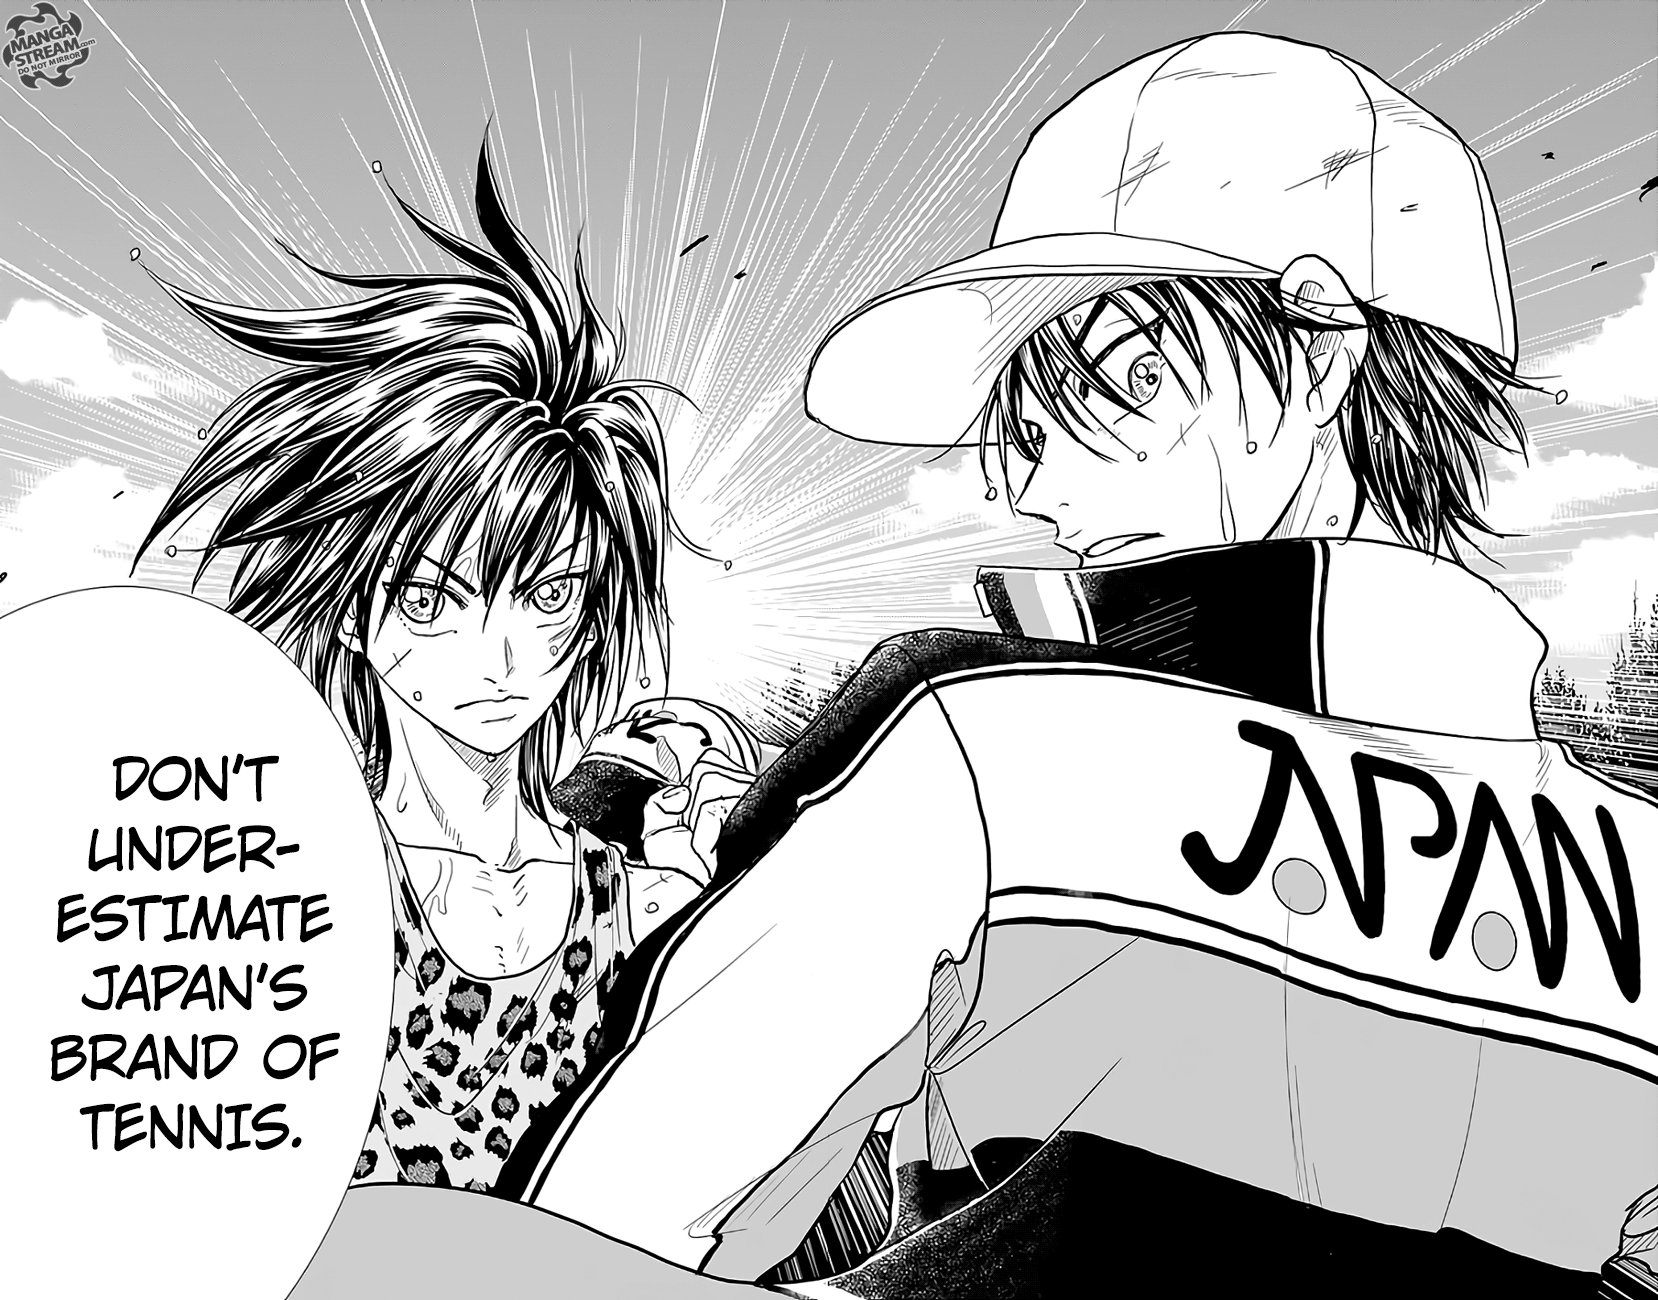 New Prince of Tennis Chapter 228